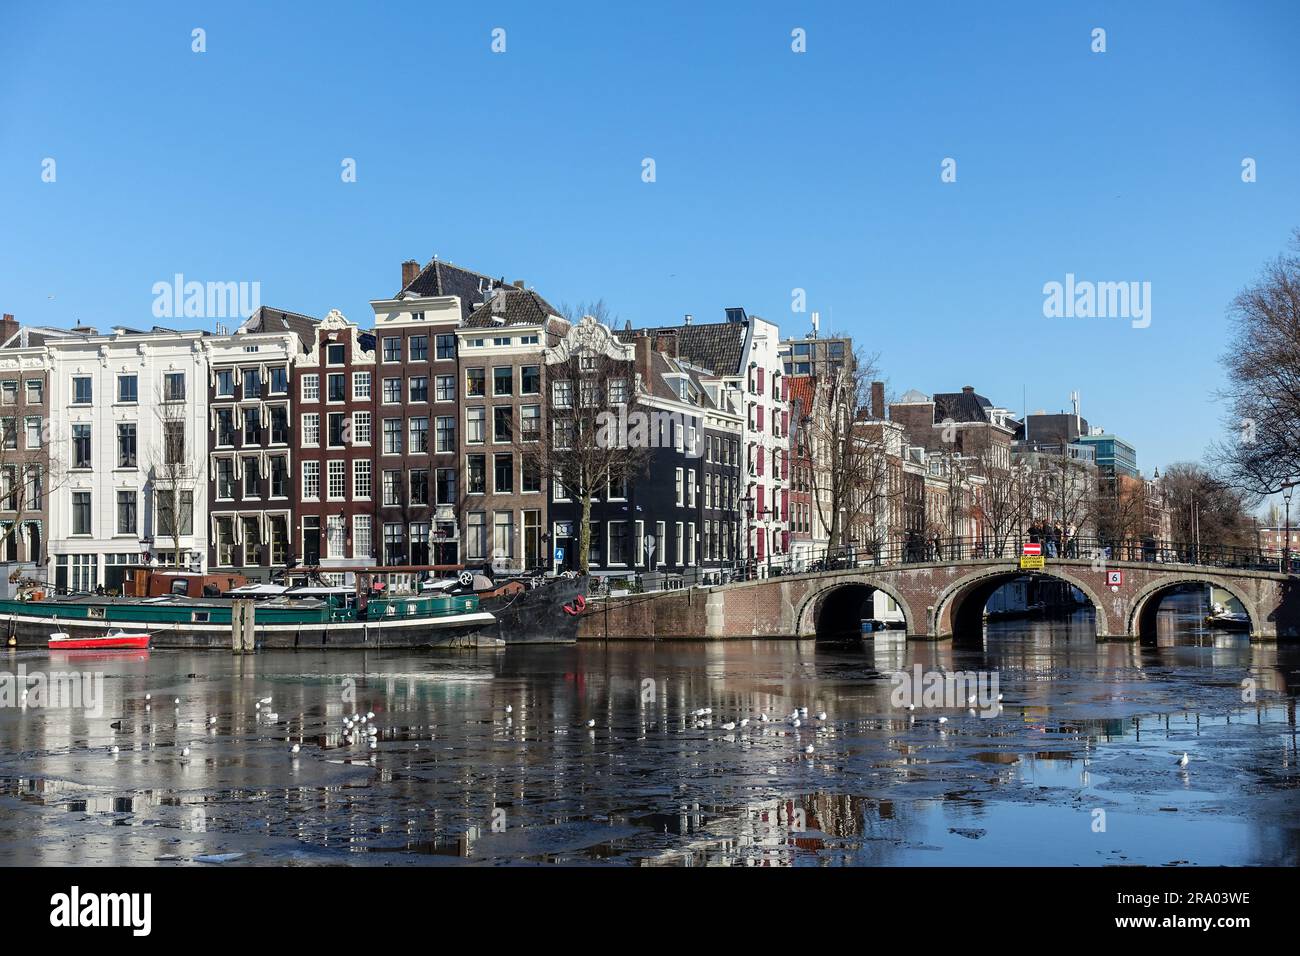 Frozen canals in the city center of Amsterdam, Netherlands Stock Photo